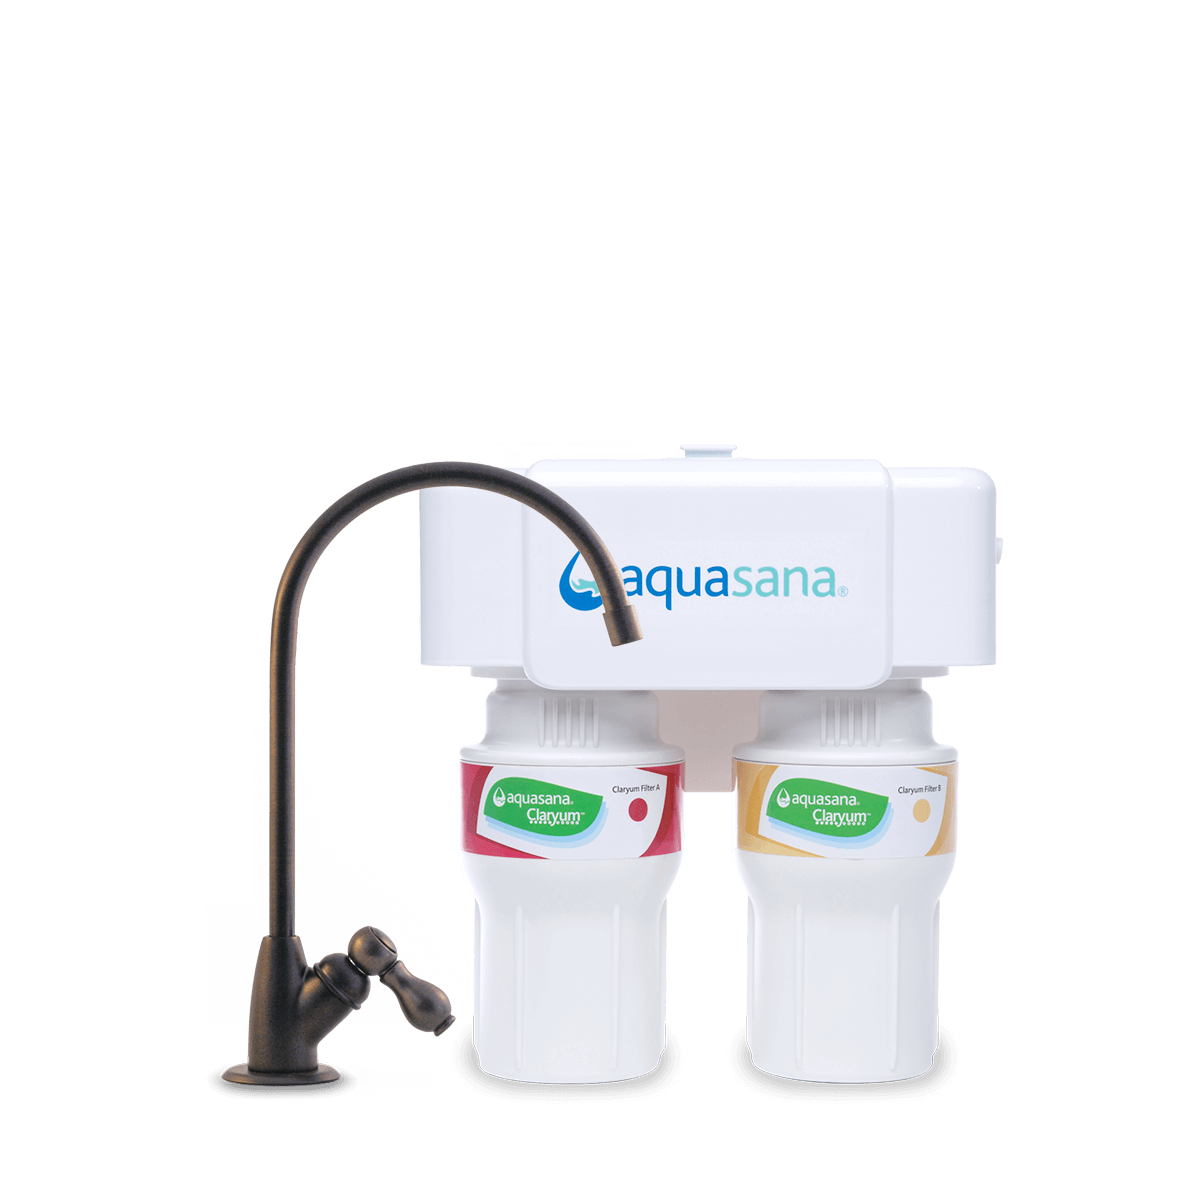 2-Stage Under Sink Water Filter, Oil Rubbed Bronze, 1/2 Year/500 Gallon Aquasana photo